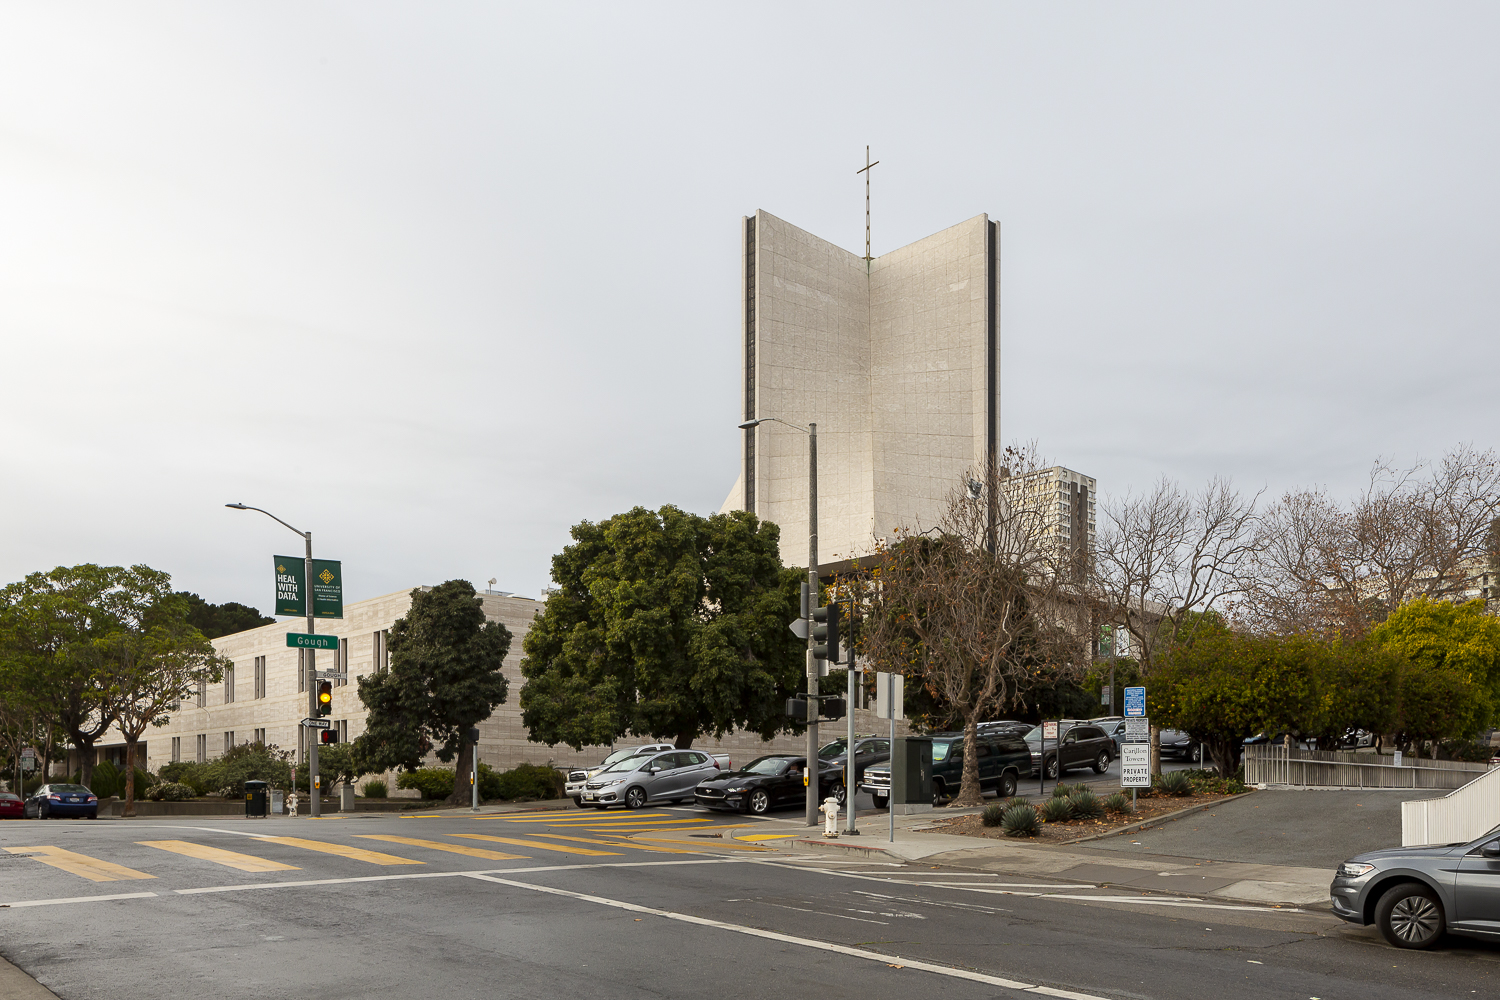 The intersection with Gough and Ellis Street, image by Andrew Campbell Nelson